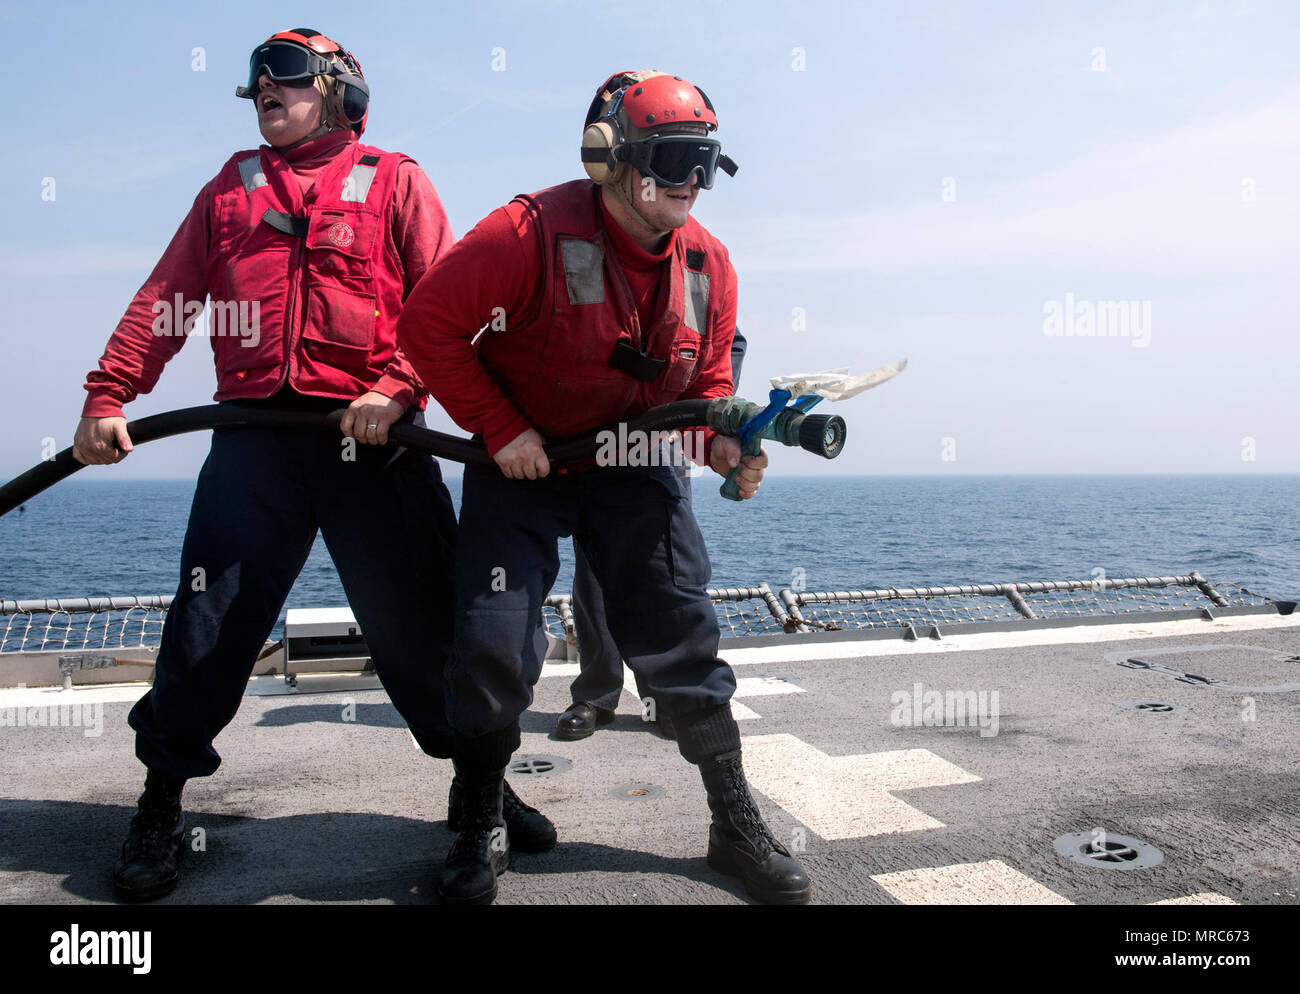 170530-N-FT178-024 WESTERN PACIFIC (May 30, 2017) Damage Controlman 1st Class Randall Miller, from Aguanga, Calif., left, and Hull Maintenance Technician 3rd Class Wane Debatin, from Pocahontas, Ill., man a fire hose during a crash and salvage drill on the flight deck of Ticonderoga-class guided-missile cruiser USS Lake Champlain (CG 57). The U.S. Navy has patrolled the Indo-Asia-Pacific routinely for more than 70 years promoting regional peace and security. (U.S. Navy photo by Mass Communication Specialist 2nd Class Nathan K. Serpico/Released) Stock Photo